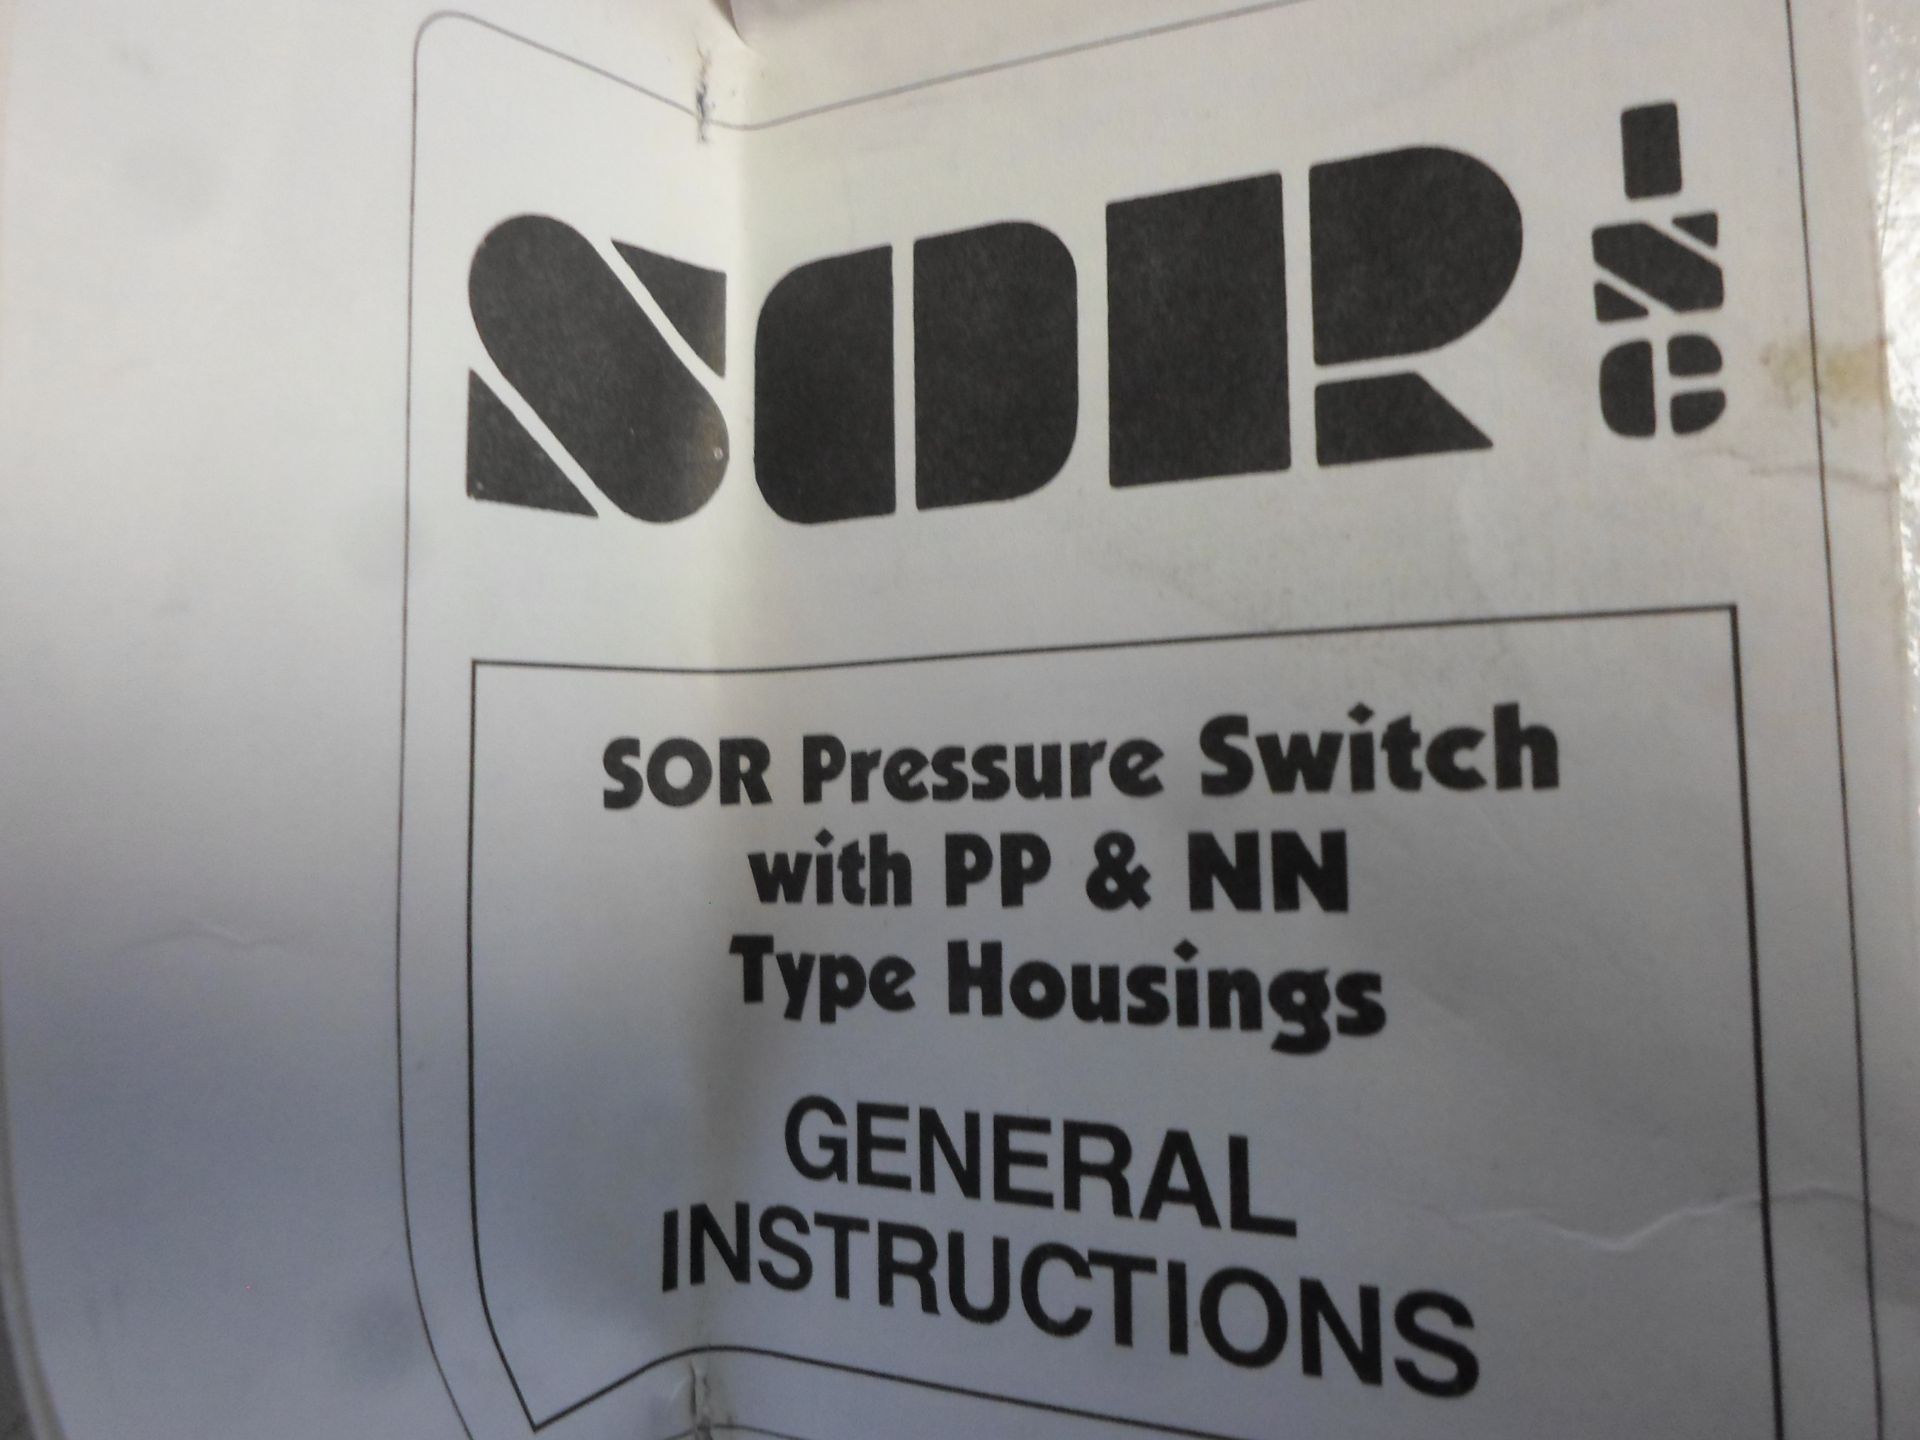 LOT OF TWO SOR PRESSURE SWITCH WITH PP & NN TYPE HOUSINGS - Image 4 of 4